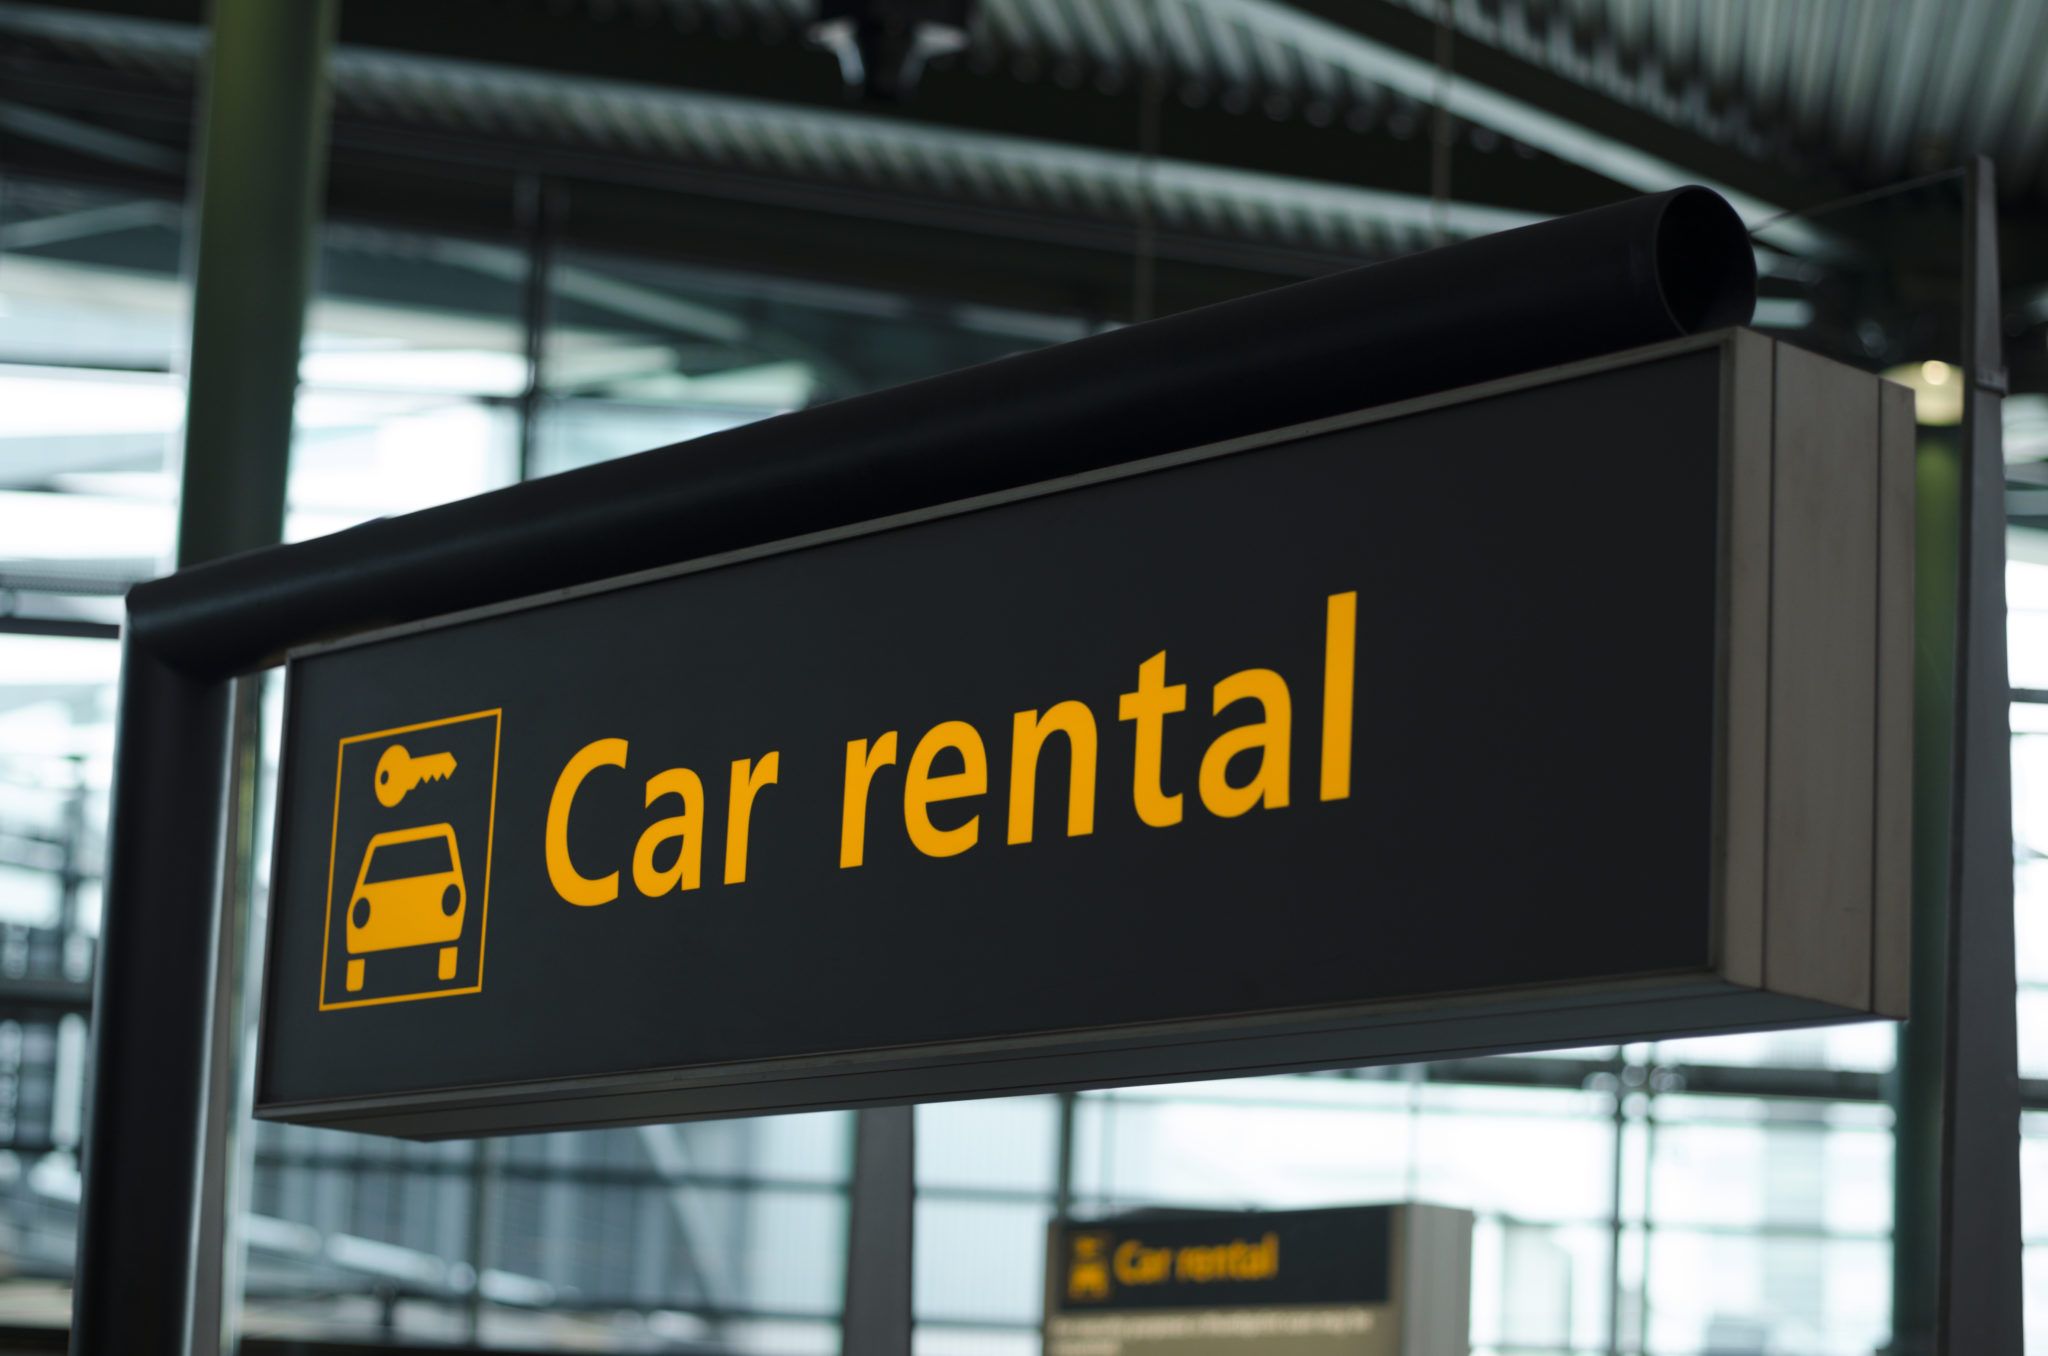 sign in an airport that reads "car rental" with an icon of a car and key